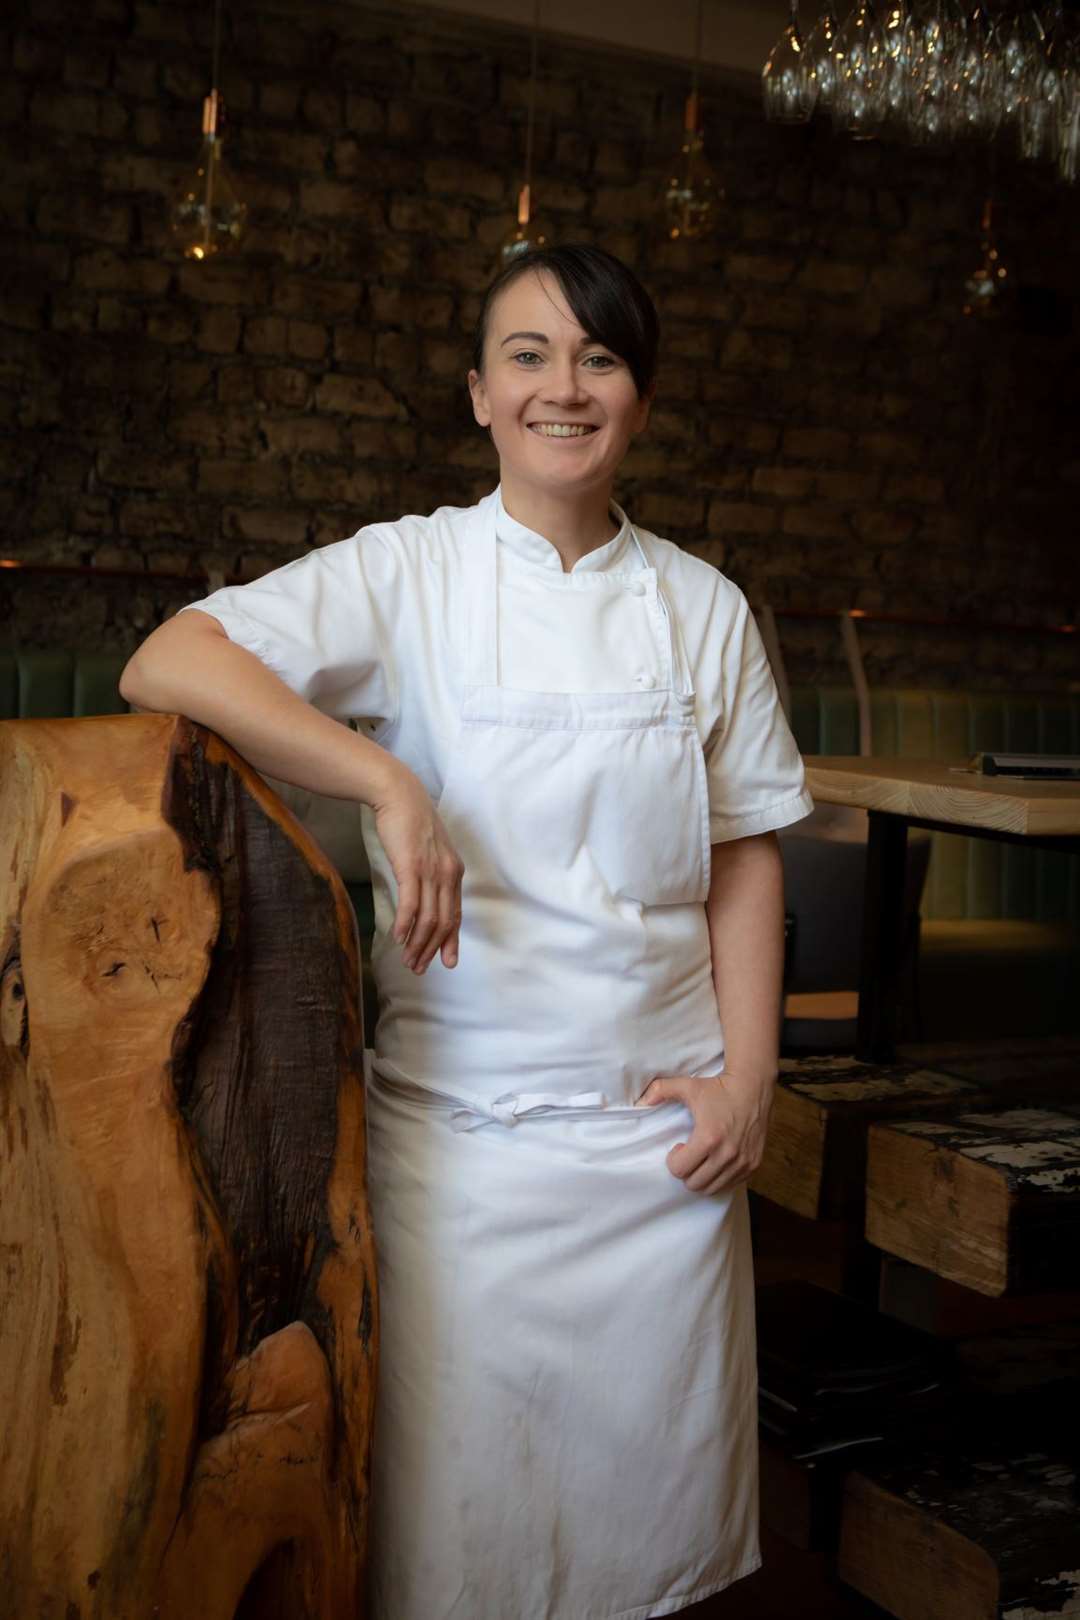 Chef Lorna McNee has won a Michelin star for Restaurant Cail Bruich in the West end of Glasgow.